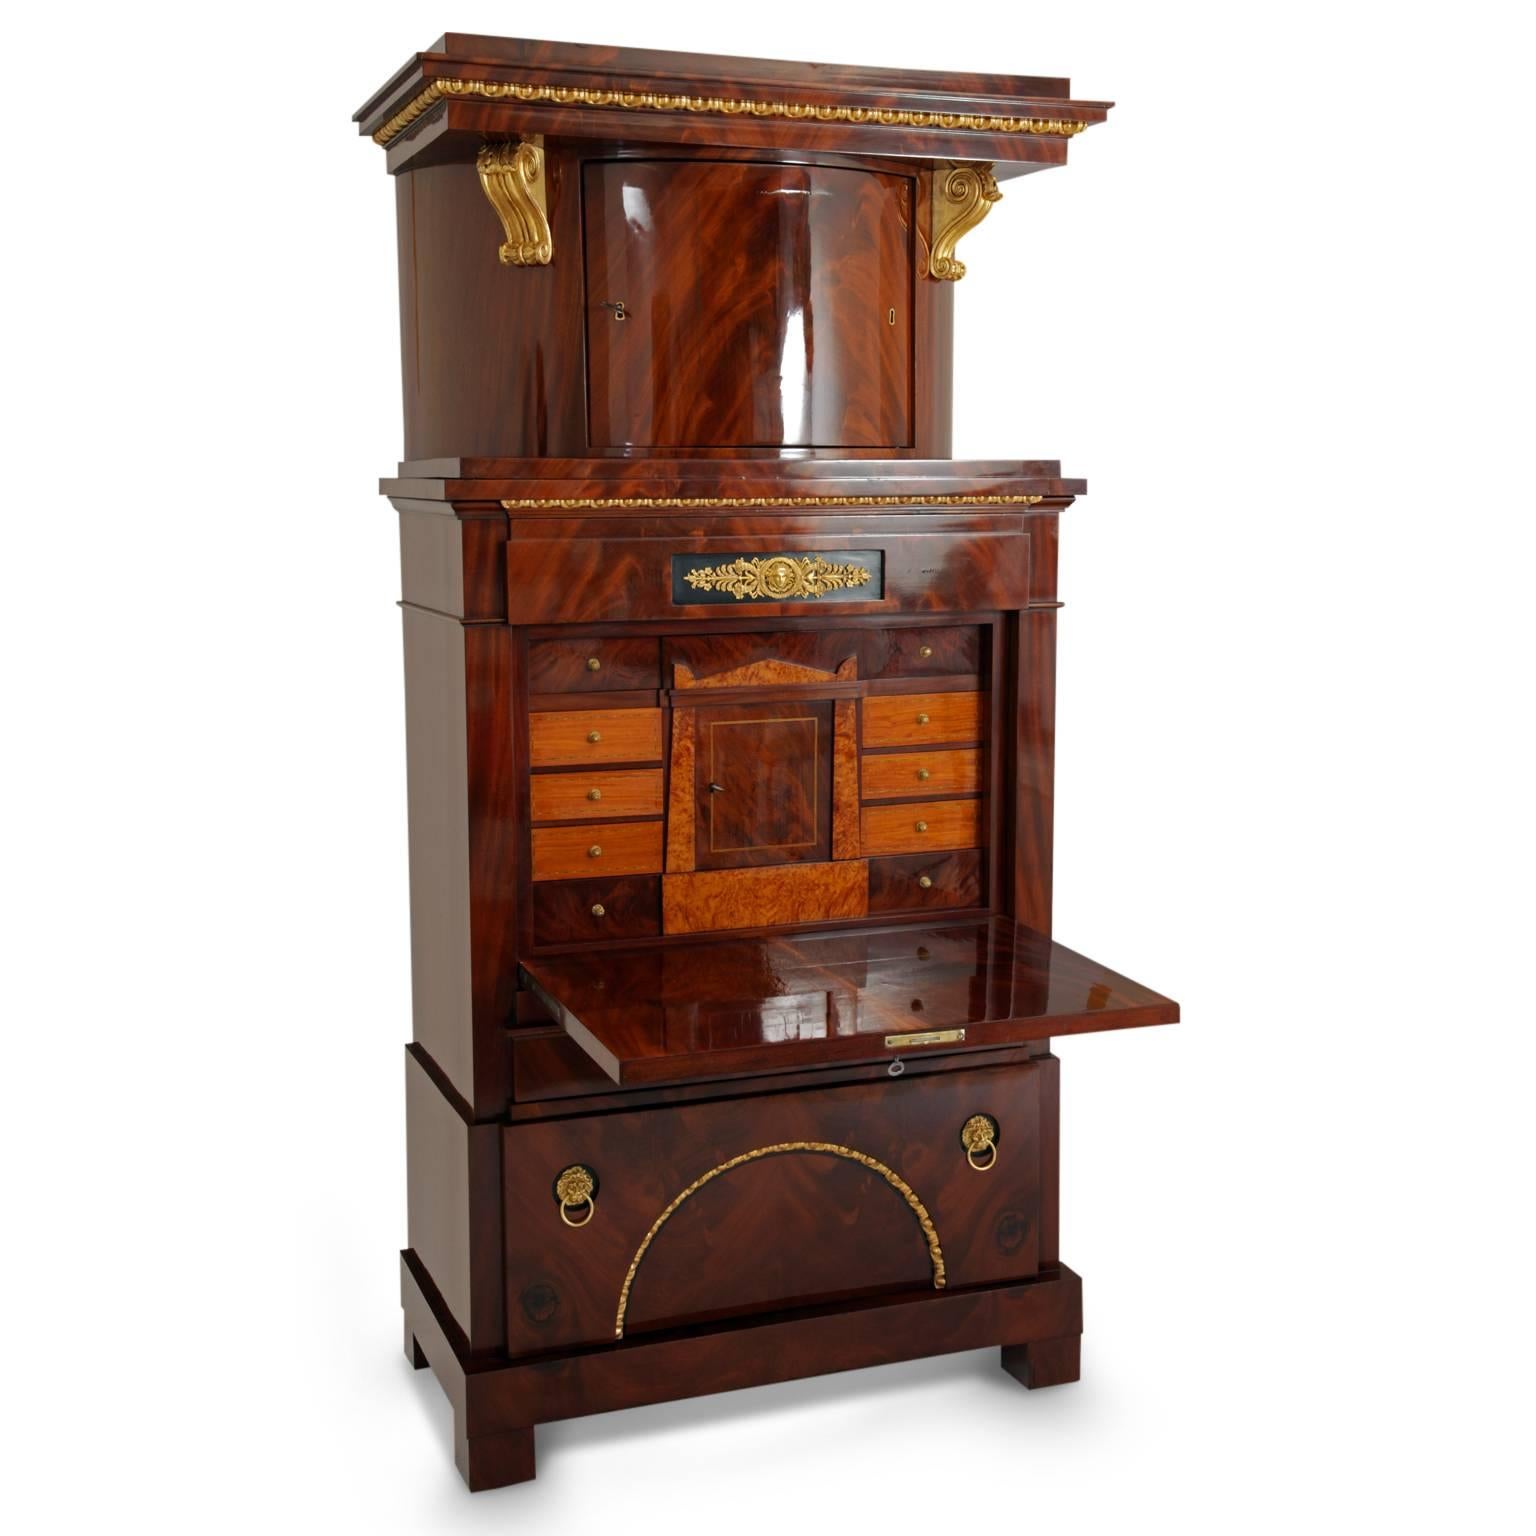 Large Empire secretary with a very beautiful flamed mahogany veneer. The body has three drawers; the interior is divided into eight drawers and one central cabinet. The rounded top is decorated with a cymatium frieze and volutes and the middle